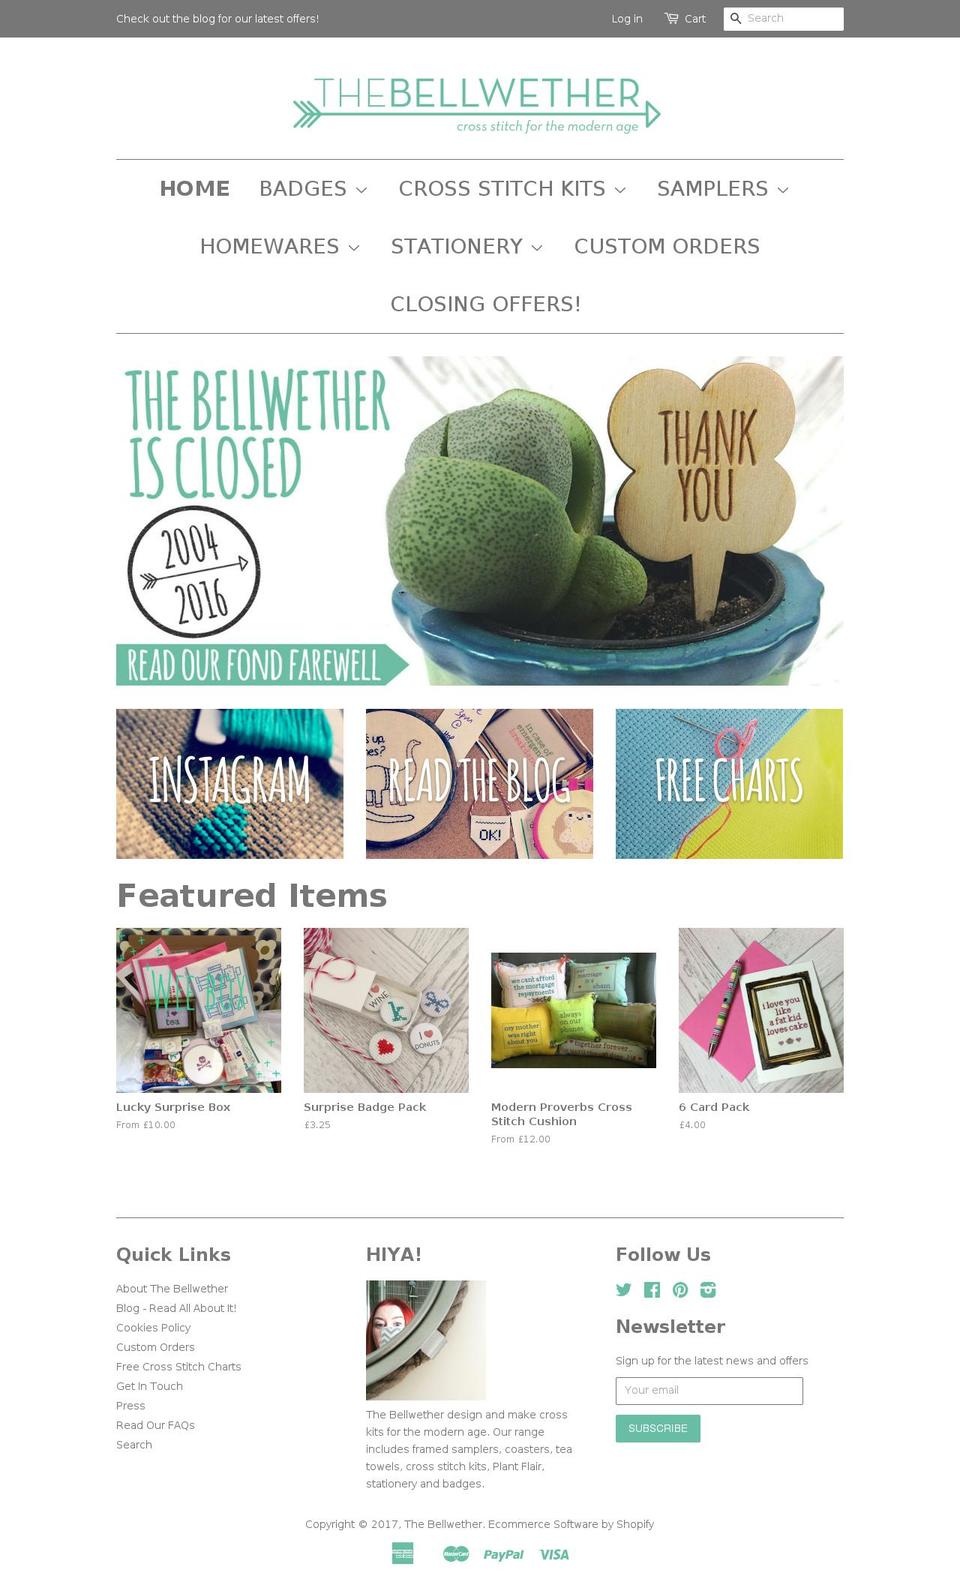 The Bellwether 2015 Shopify theme site example thebellweather.com